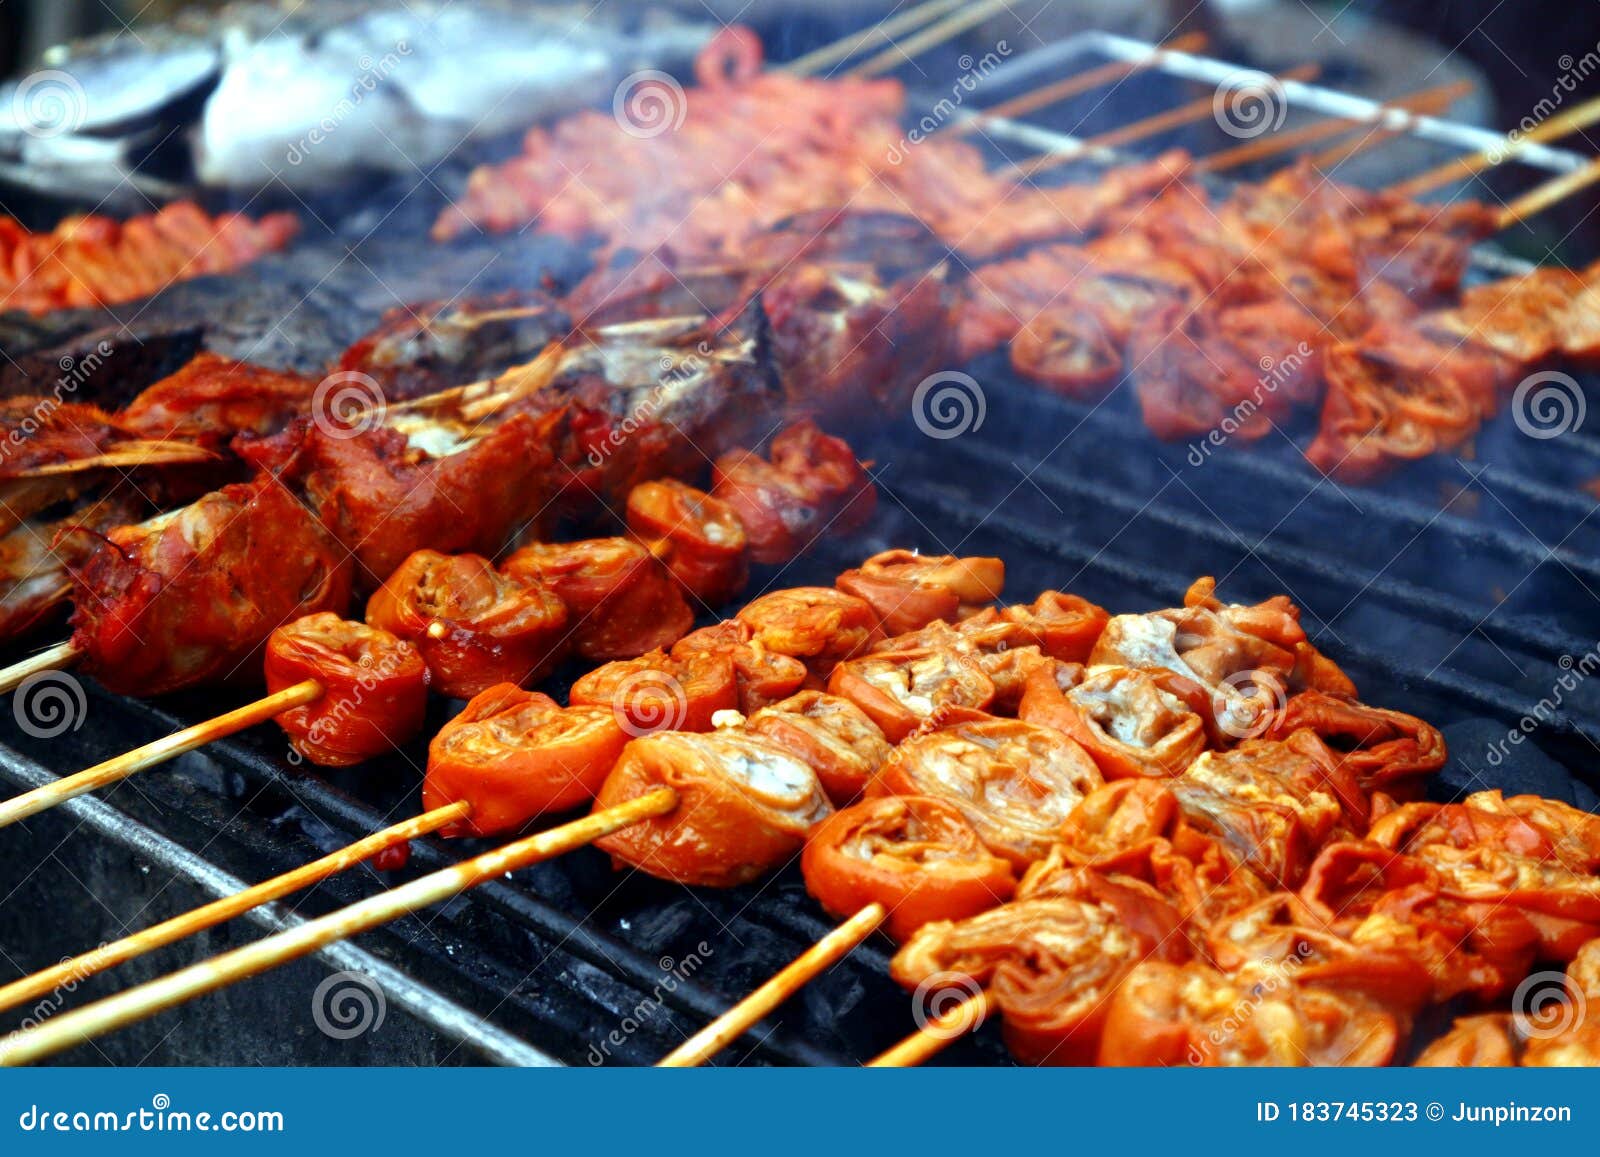 Assorted Grilled Pork And Chicken Innards Barbecue At A Street Food Stall  Stock Image - Image Of Philippines, Innards: 183745323